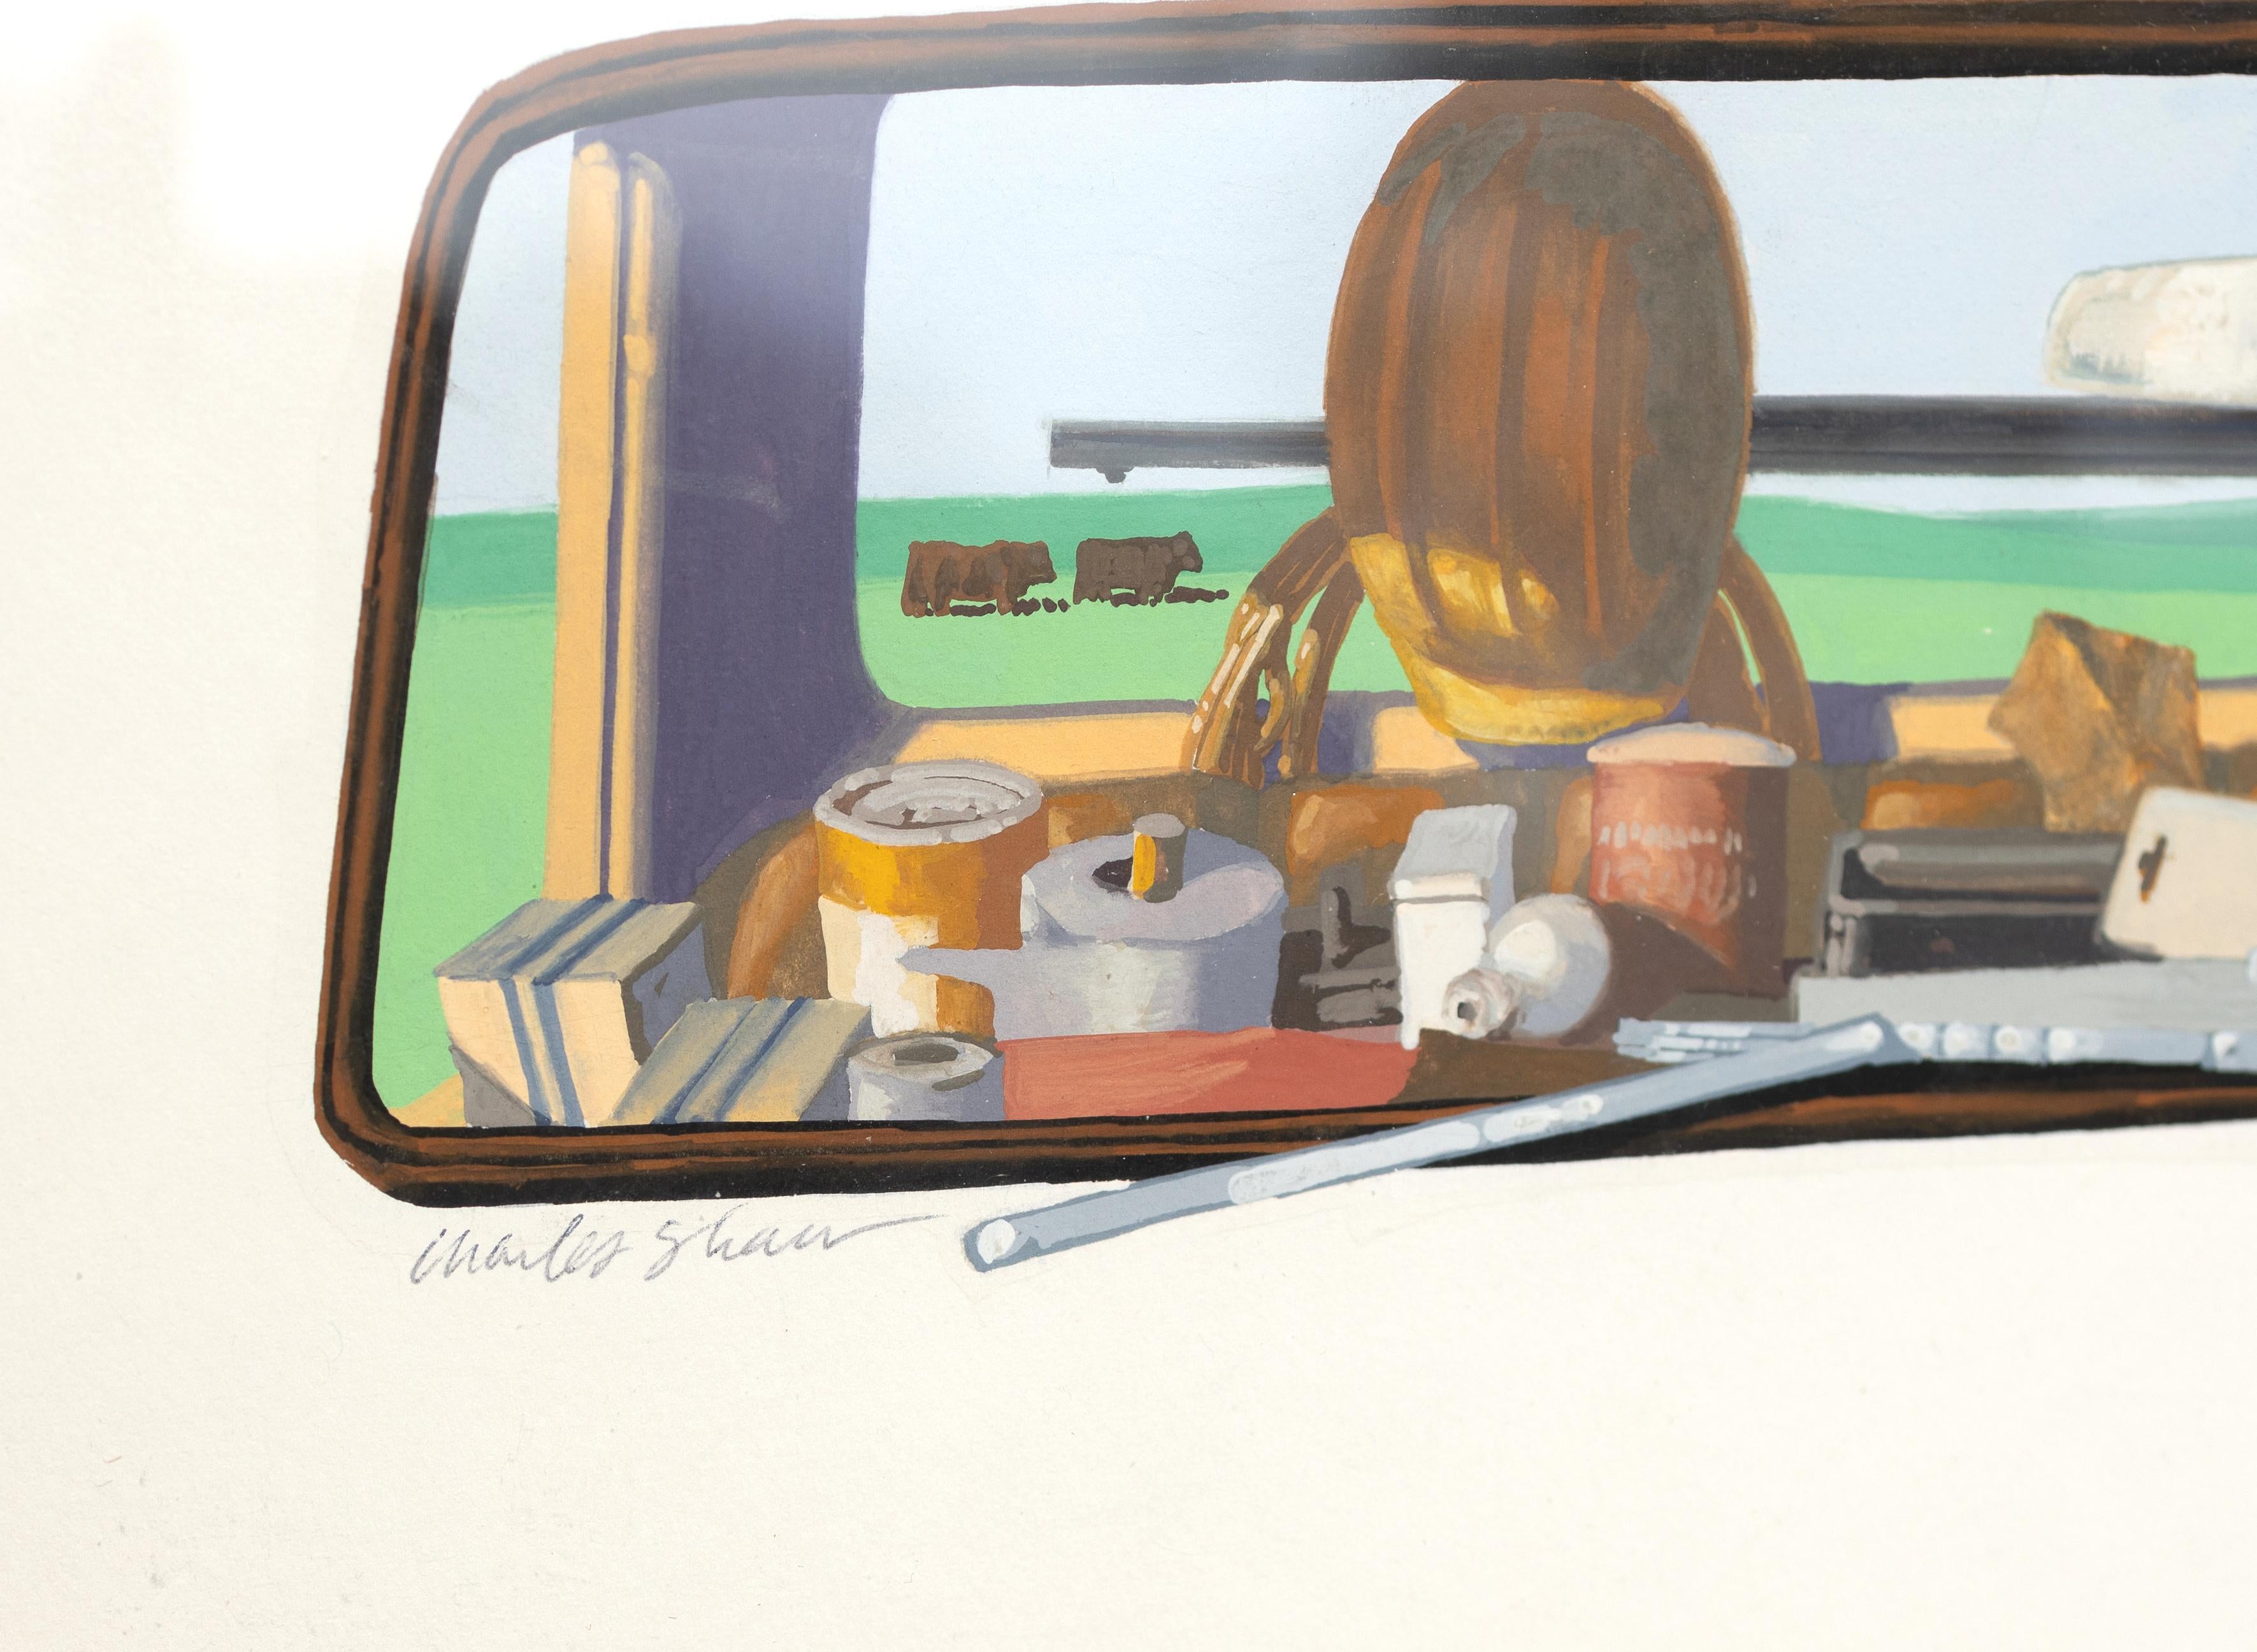 This still-life watercolor painting singles the portion of a scene visible through a windshield of a truck. Inside, an array of items sit on the dashboard. A cowboy had and a construction helmet as well as a gun hang on the back window of the truck.